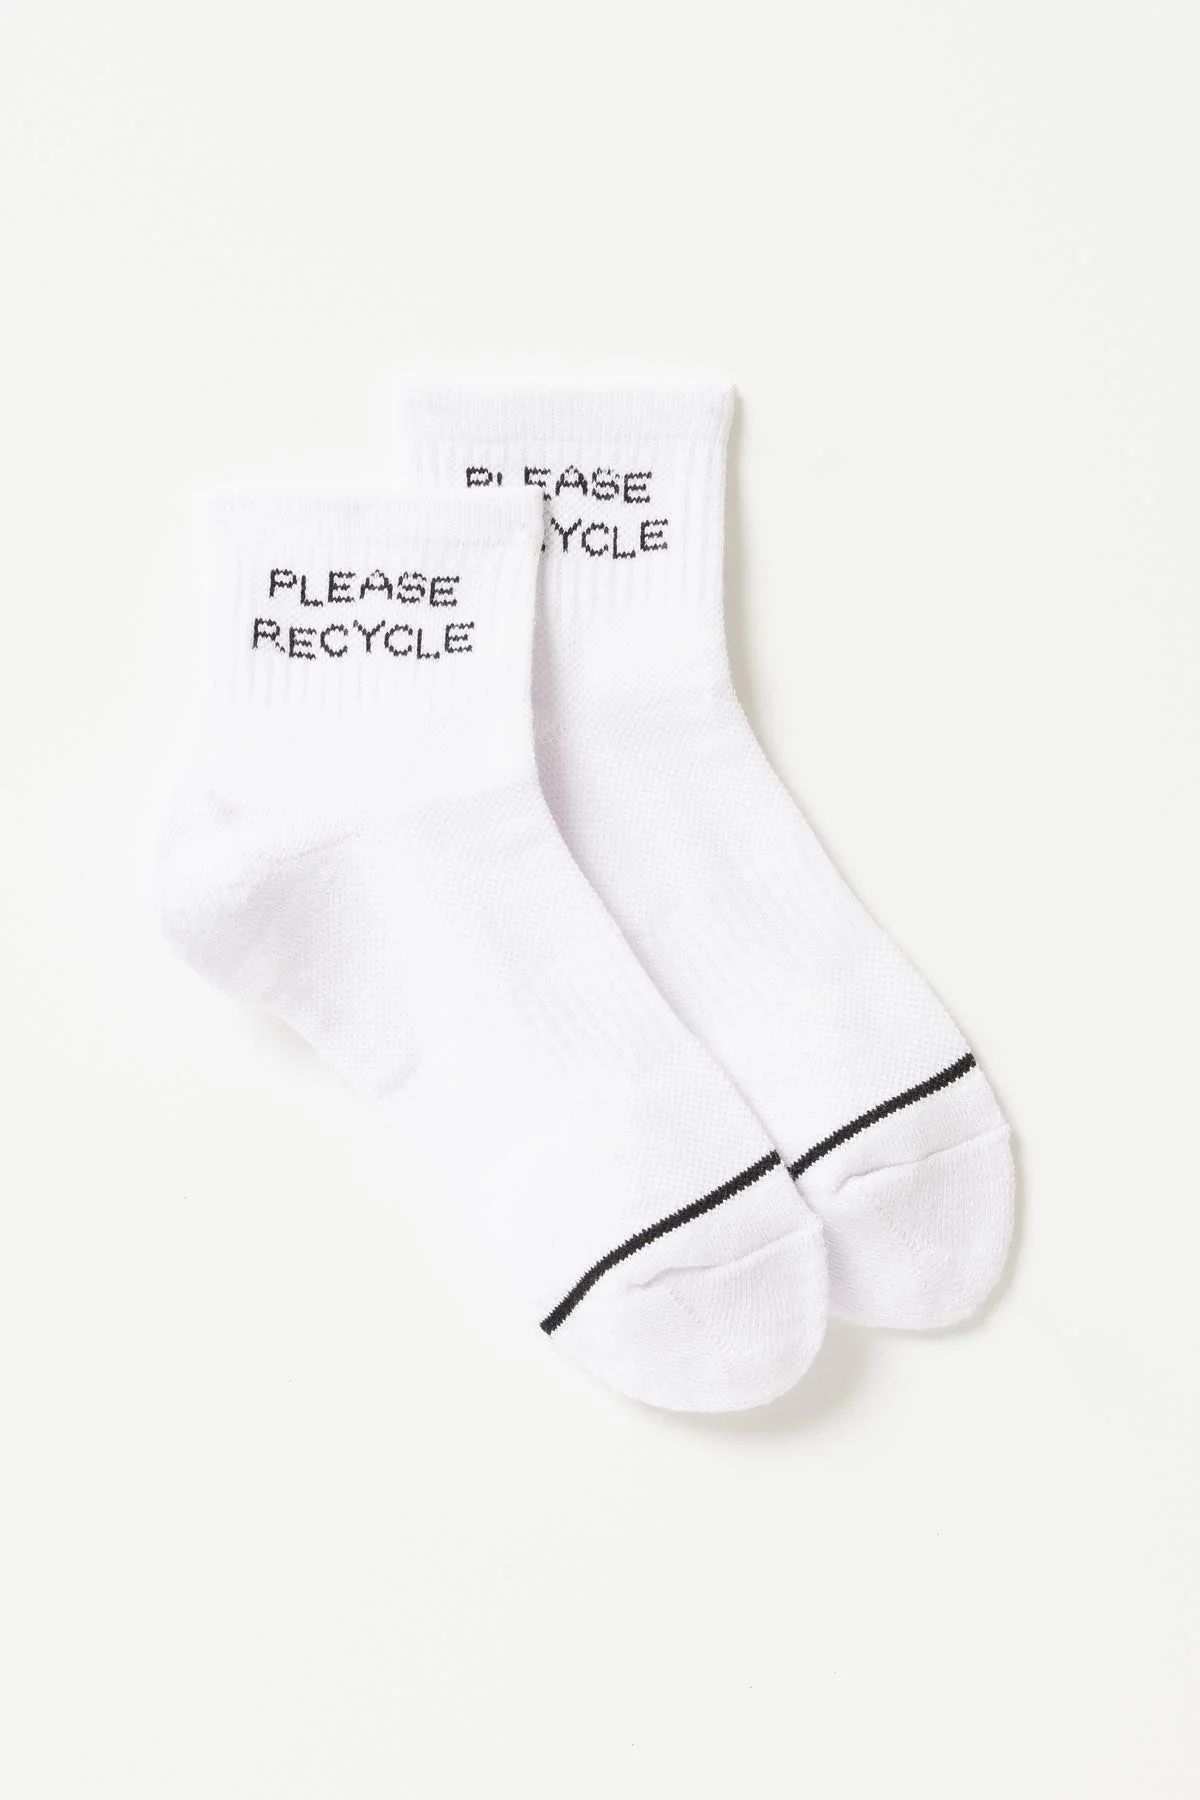 White Please Recycle Quarter Crew Sock | Girlfriend Collective